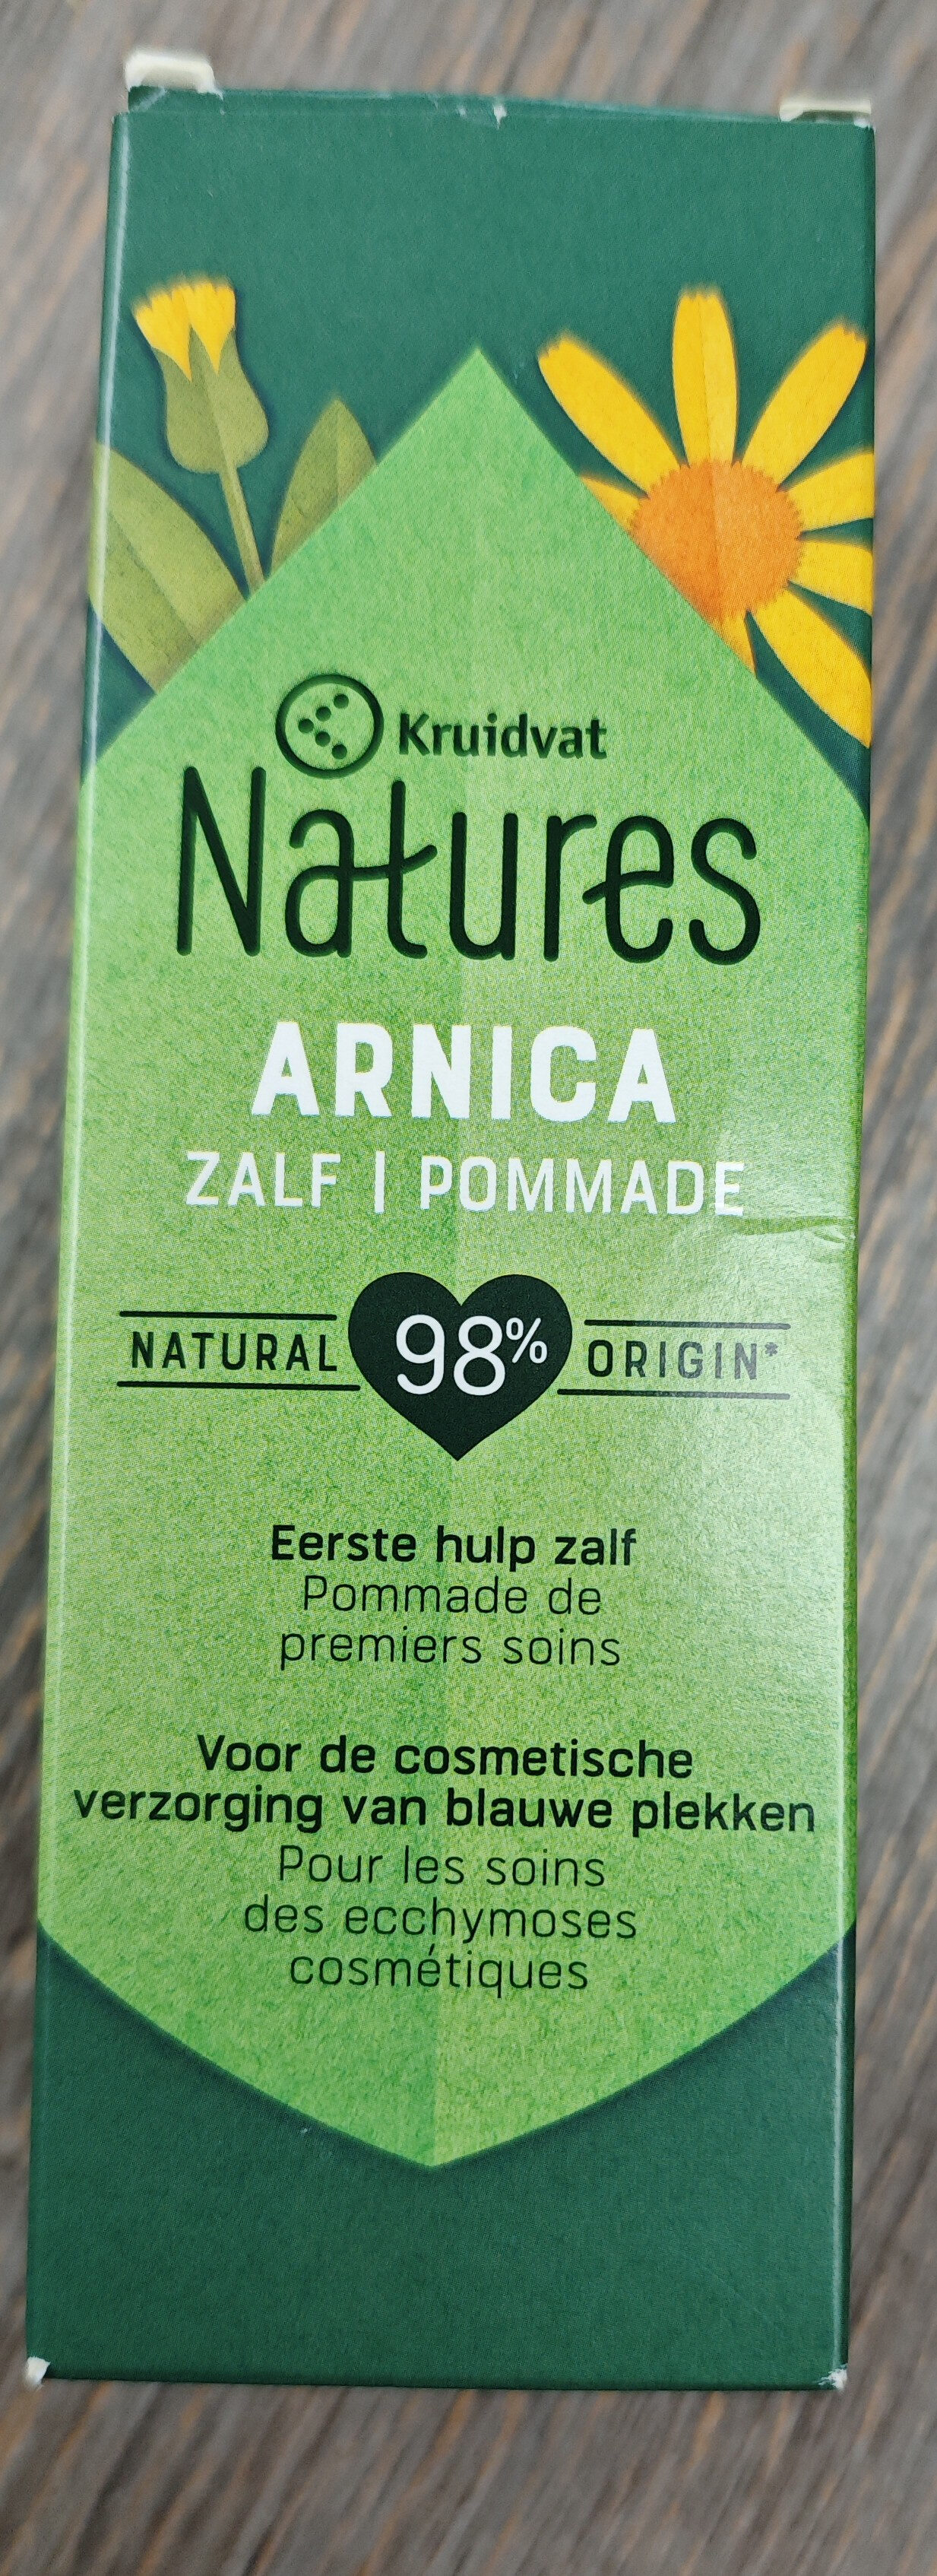 Kruidvat Natures Arnica - Tuote - fr